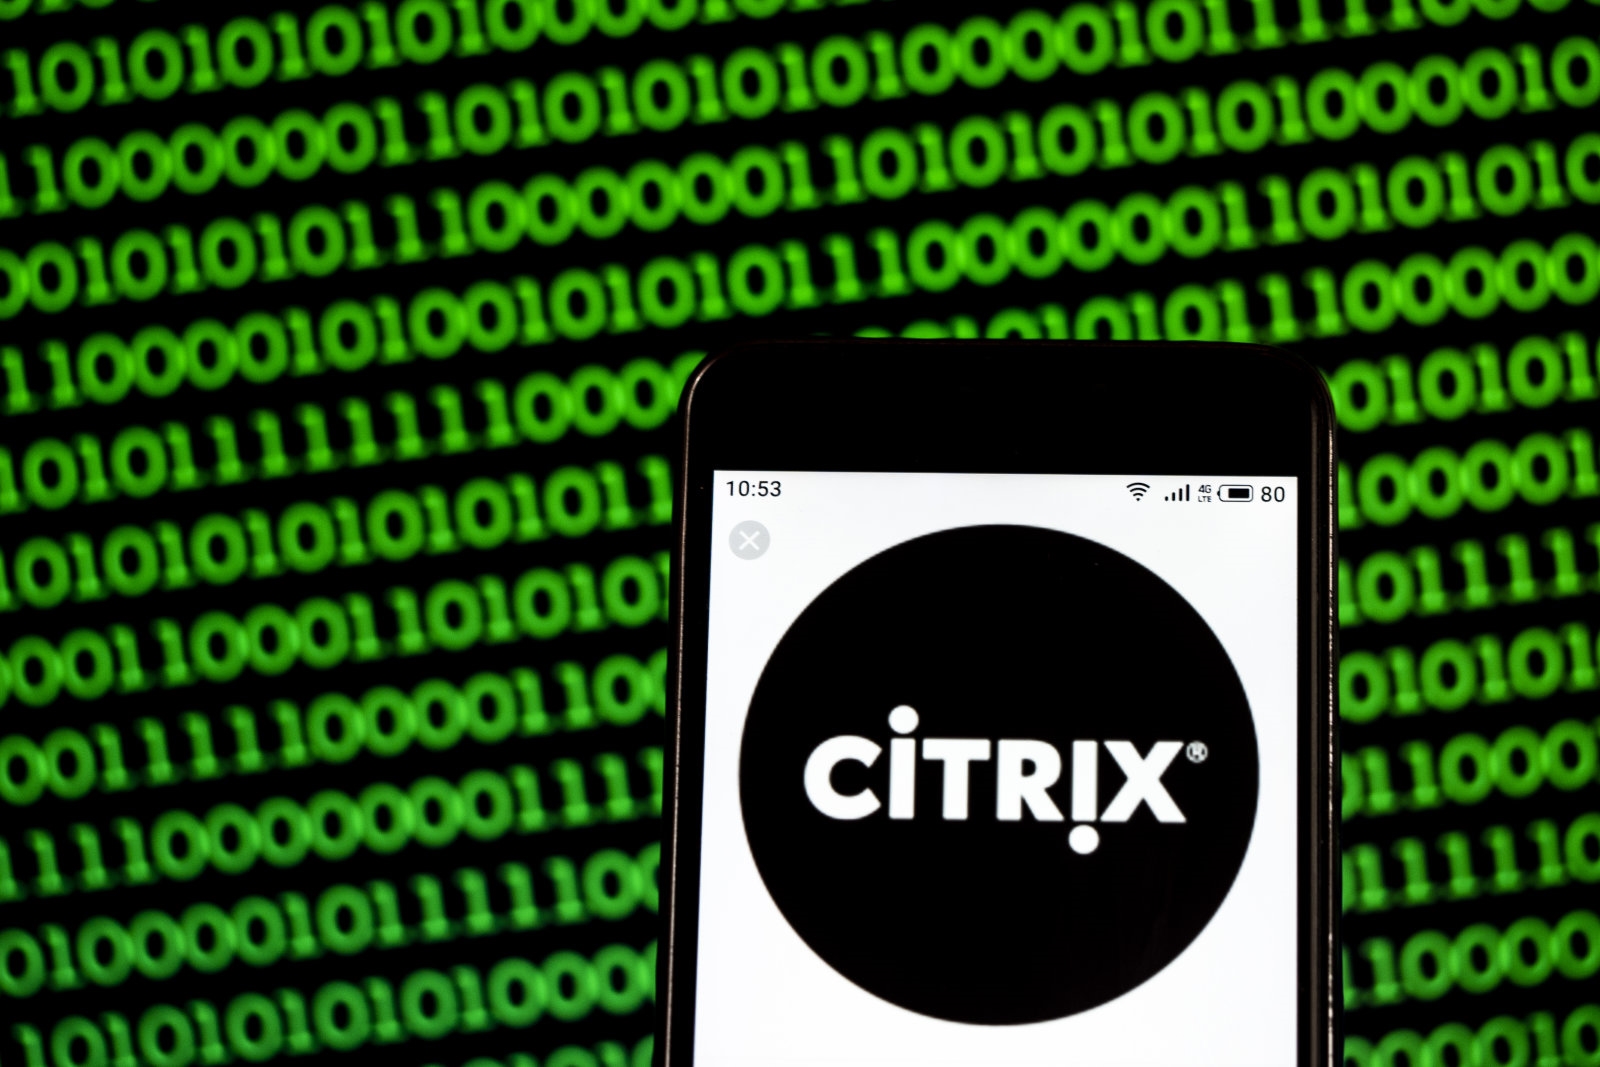 Iranian hackers stole terabytes of data from software giant Citrix | DeviceDaily.com